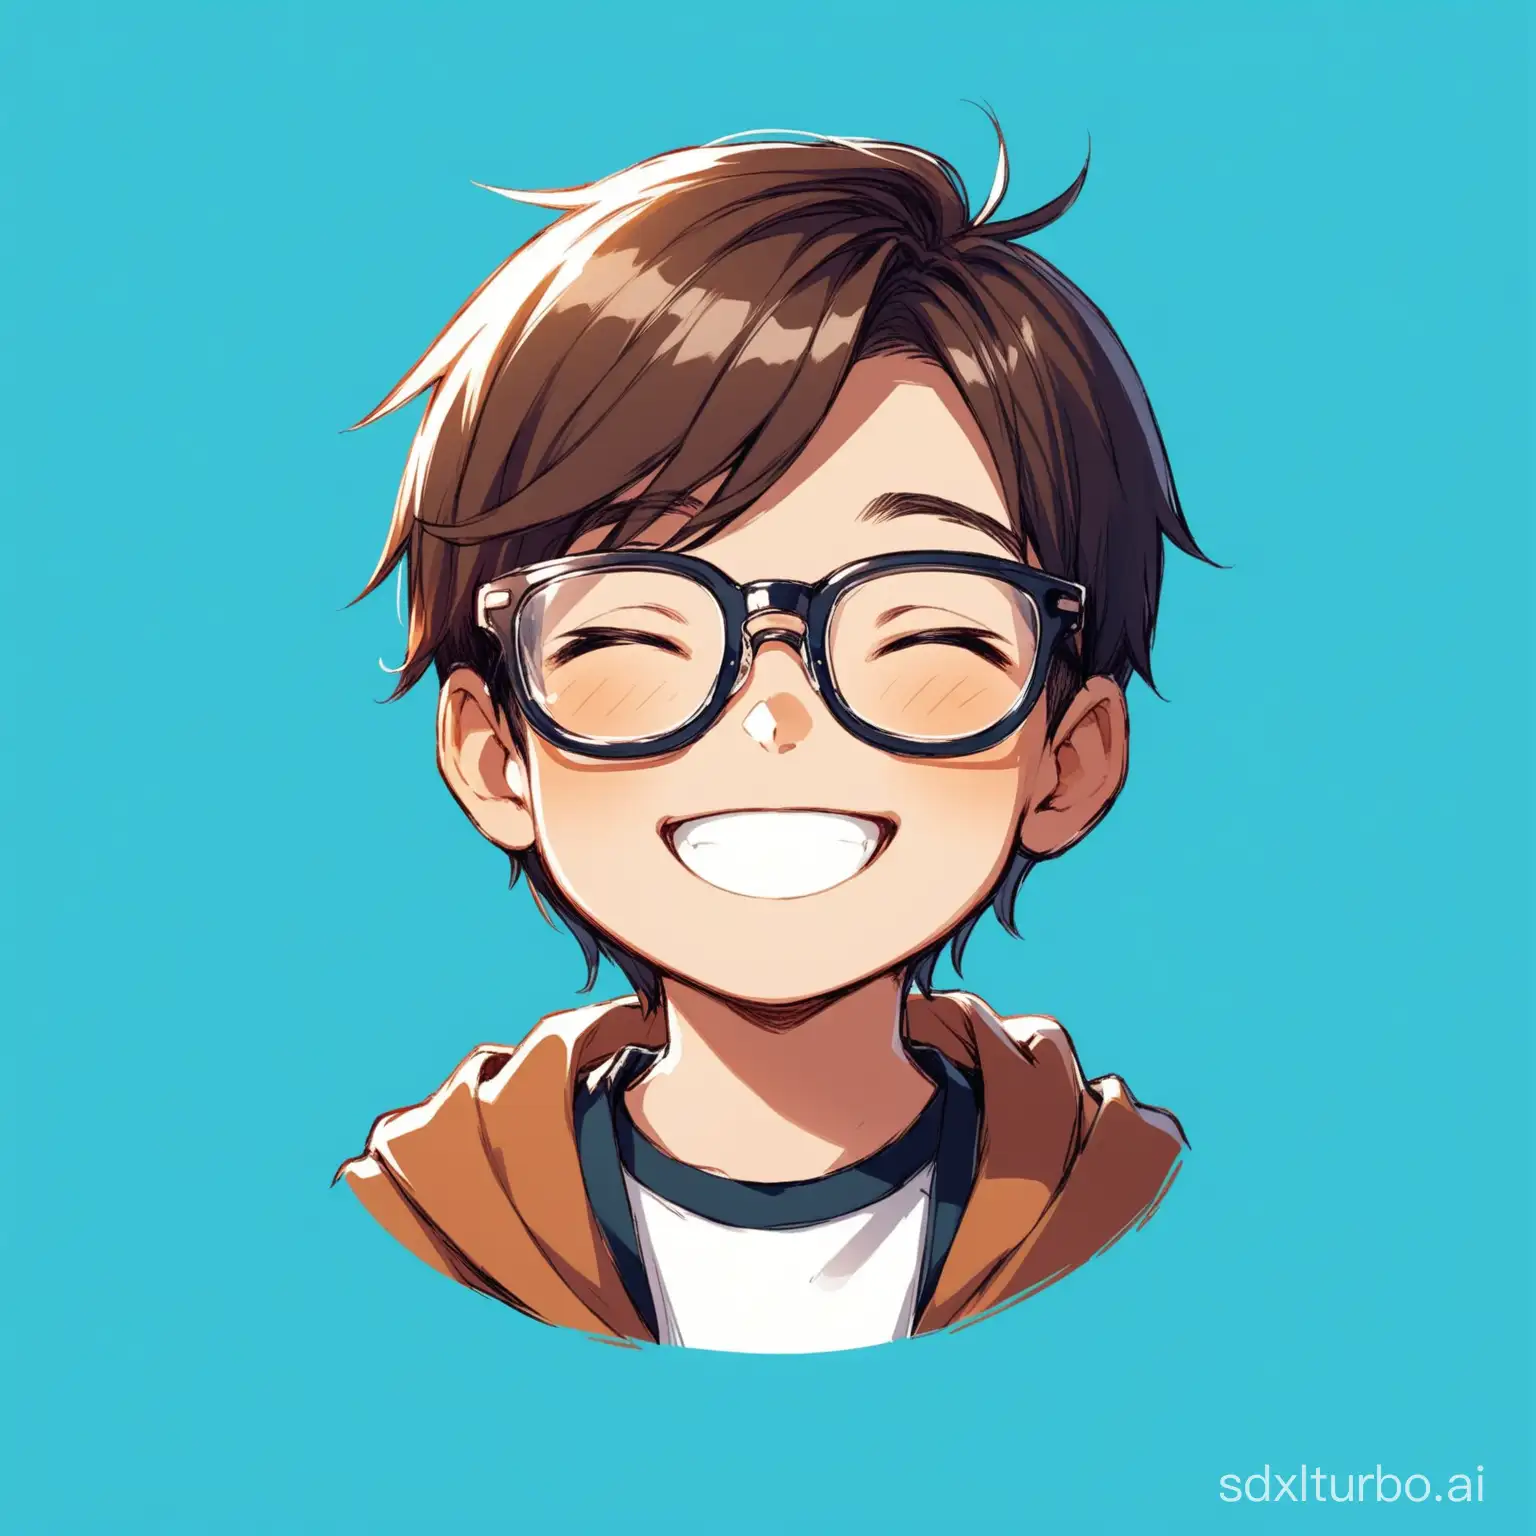 Cheerful-Boy-with-Glasses-Against-a-Serene-Blue-Sky-Background